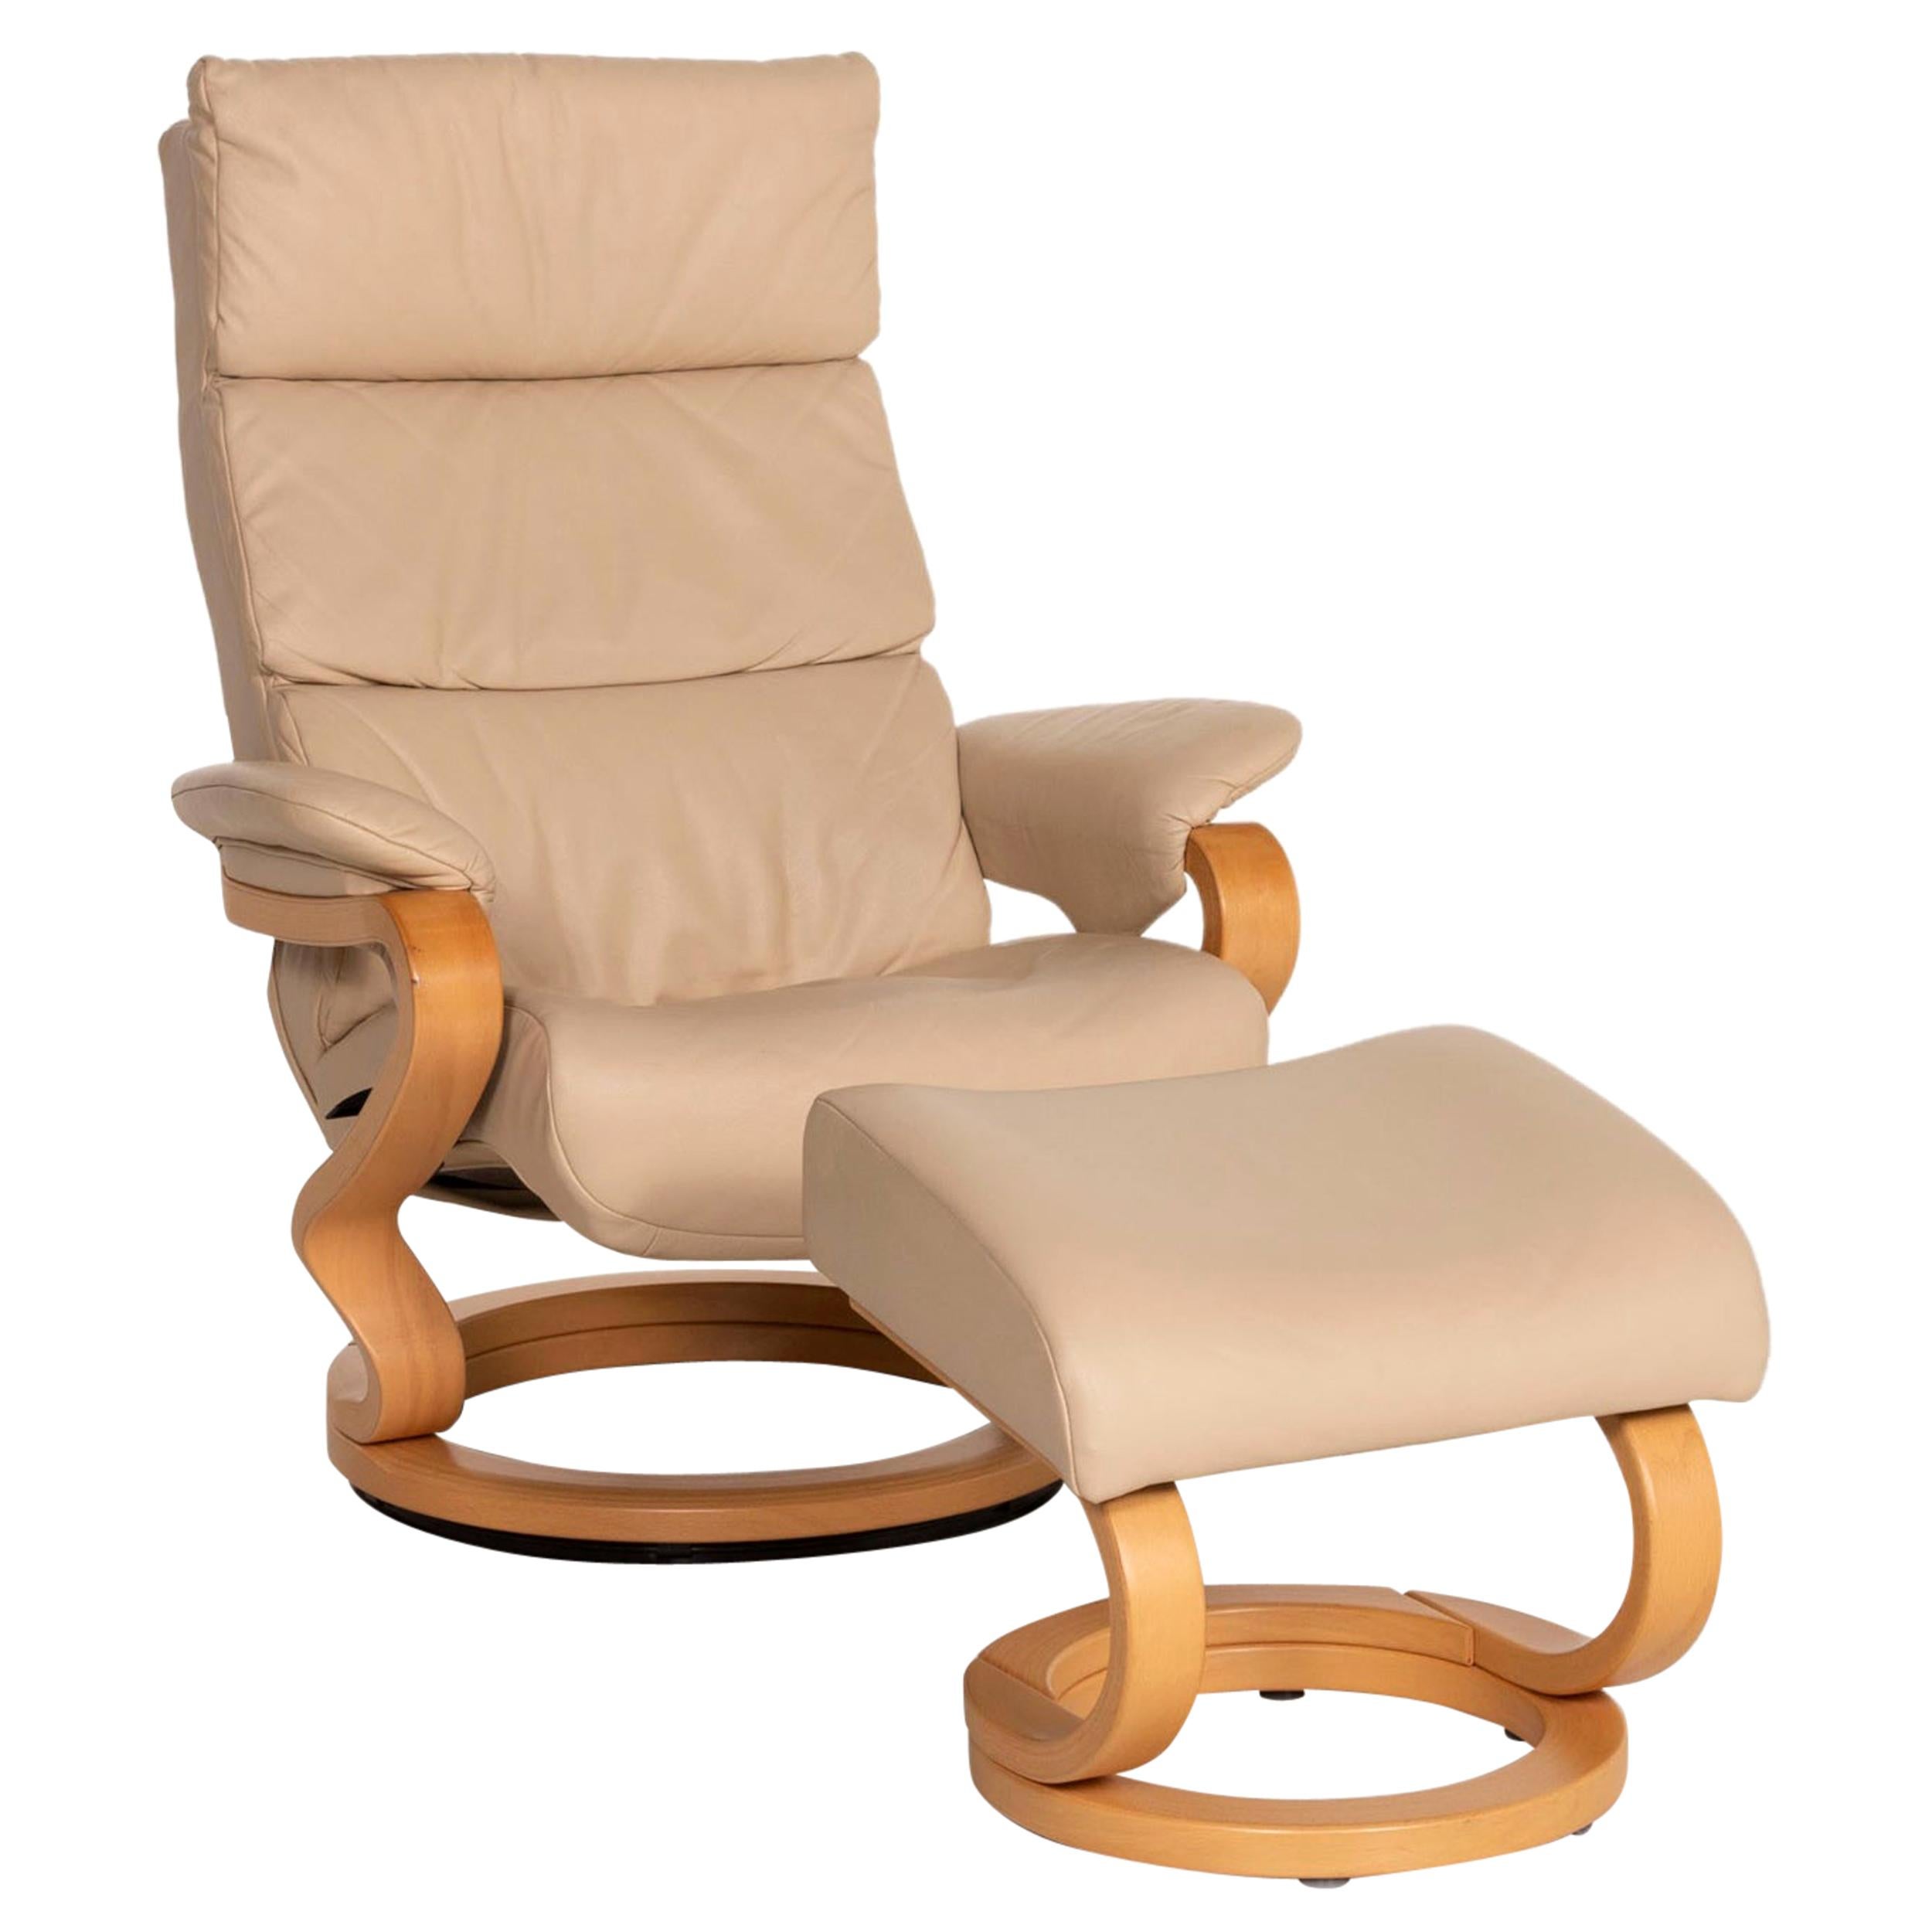 Himolla Leather Armchair Beige Function Relaxation Function